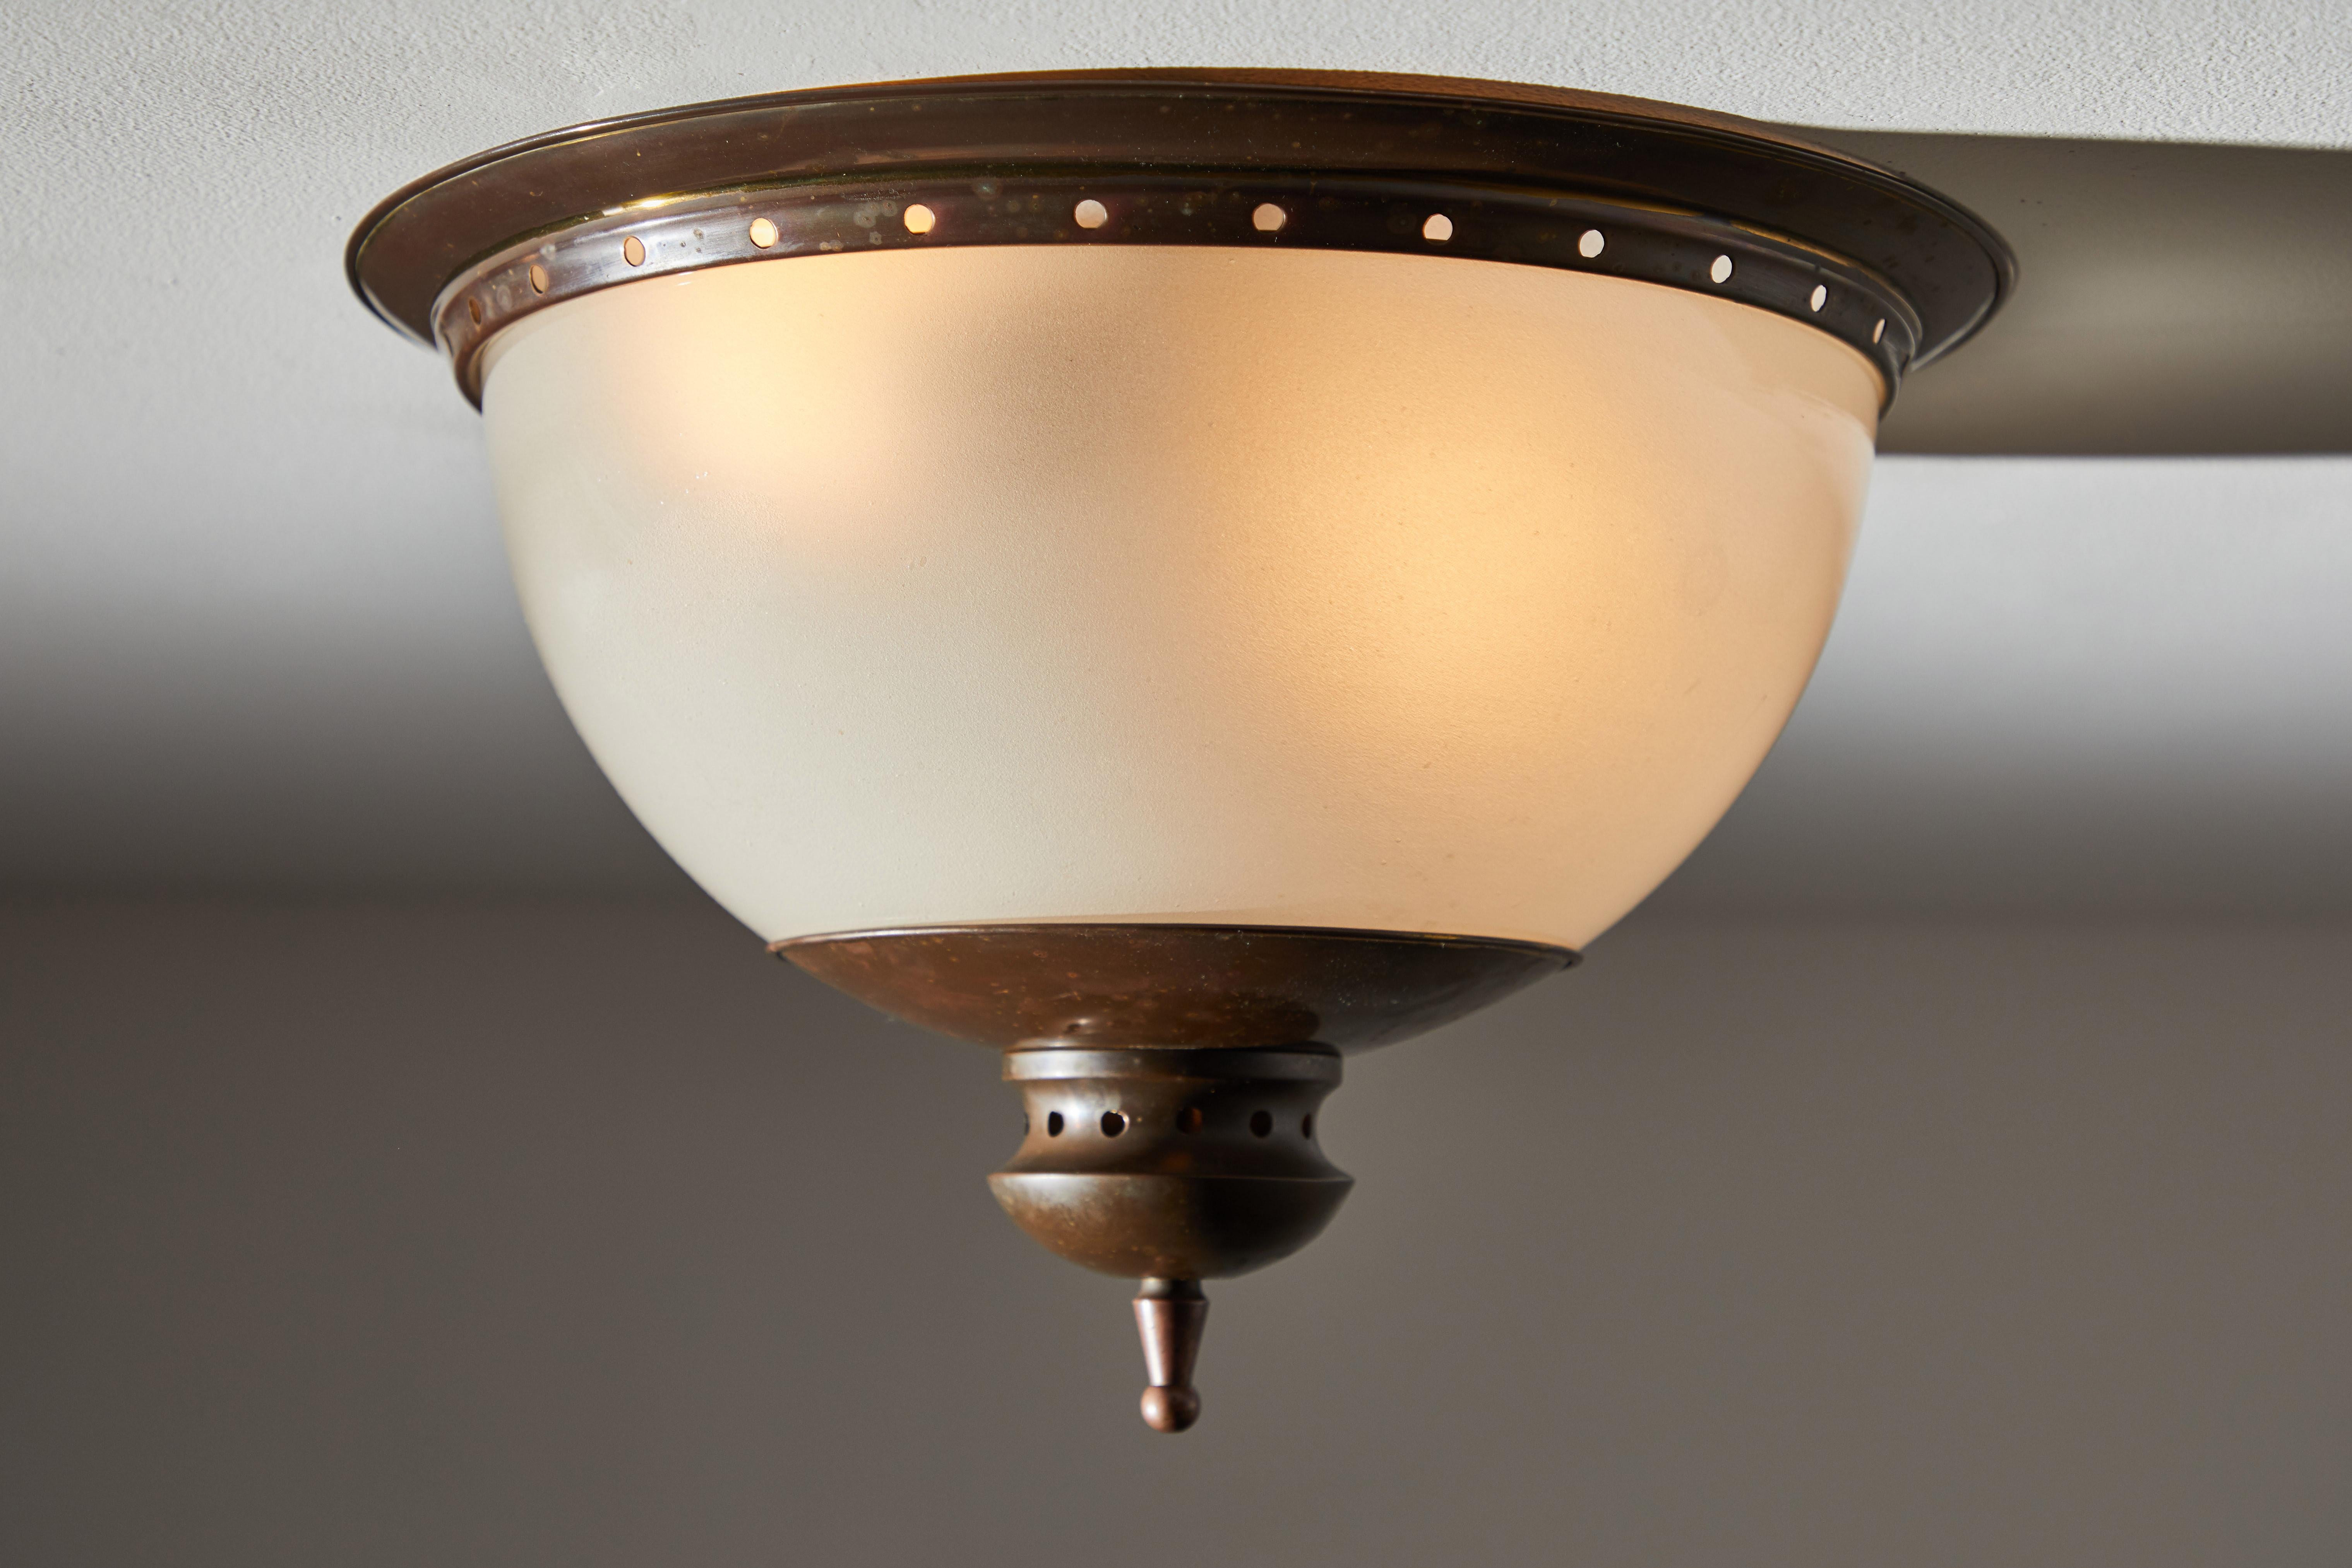 Two flush mount ceiling lights by Caccia Dominioni for Azucena. Designed and manufactured in Italy, circa 1950s. Pewter plated brass, opaline glass. Rewired for U.S. Junction boxes. Each light takes two E27 75w maximum bulbs. Bulbs provided as a